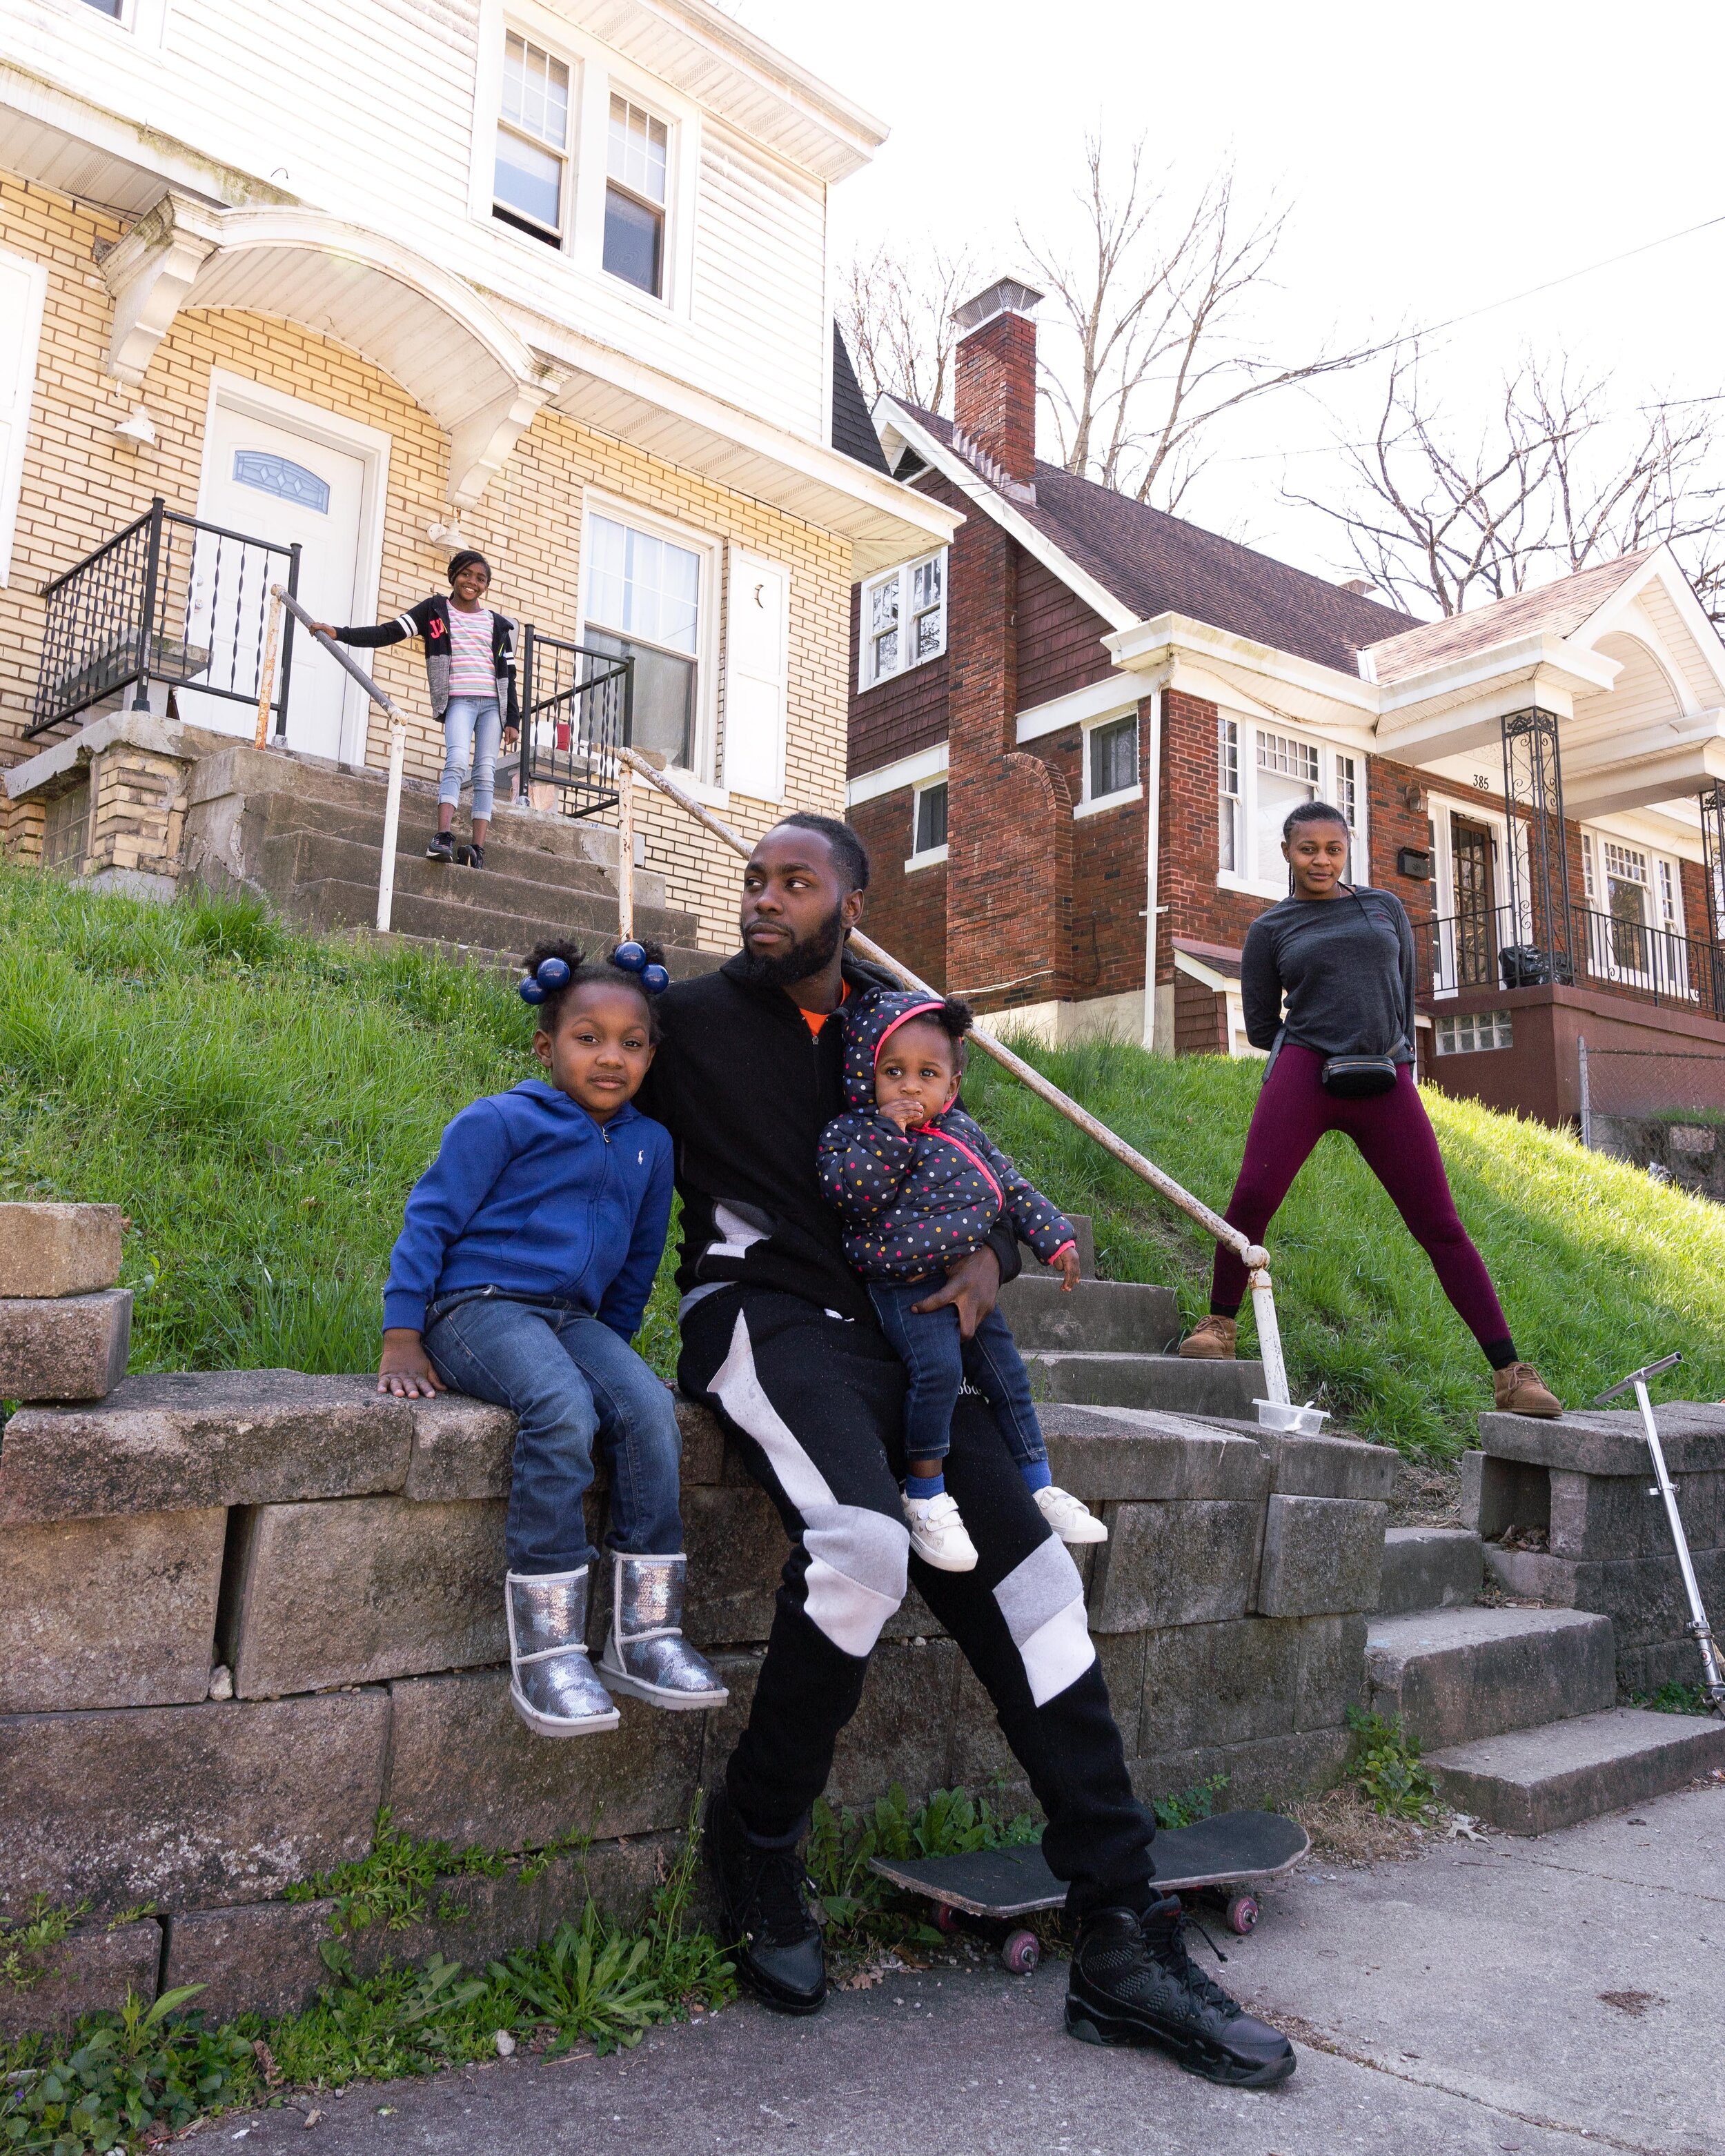  “We’ve been spending a lot more time with our babies, not working since everything started. We get outside every chance we get though. Thank you lord for a yard for these kids.” - Lemark (father &amp; family) | 04/02/20 (Cincinnati, OH) 